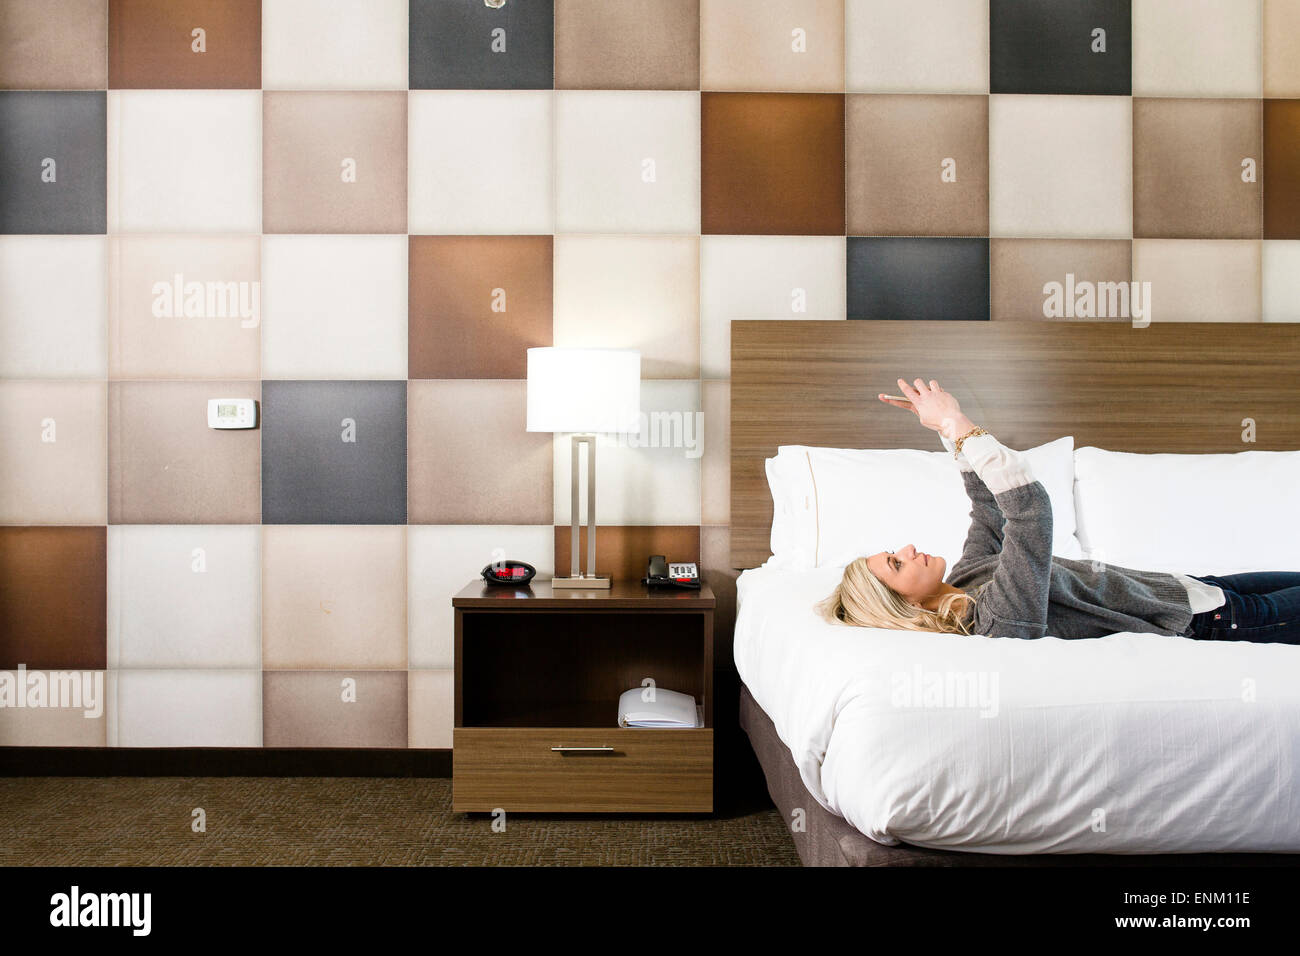 A beautiful lady takes selfie as she lies on a motel room bed. Stock Photo